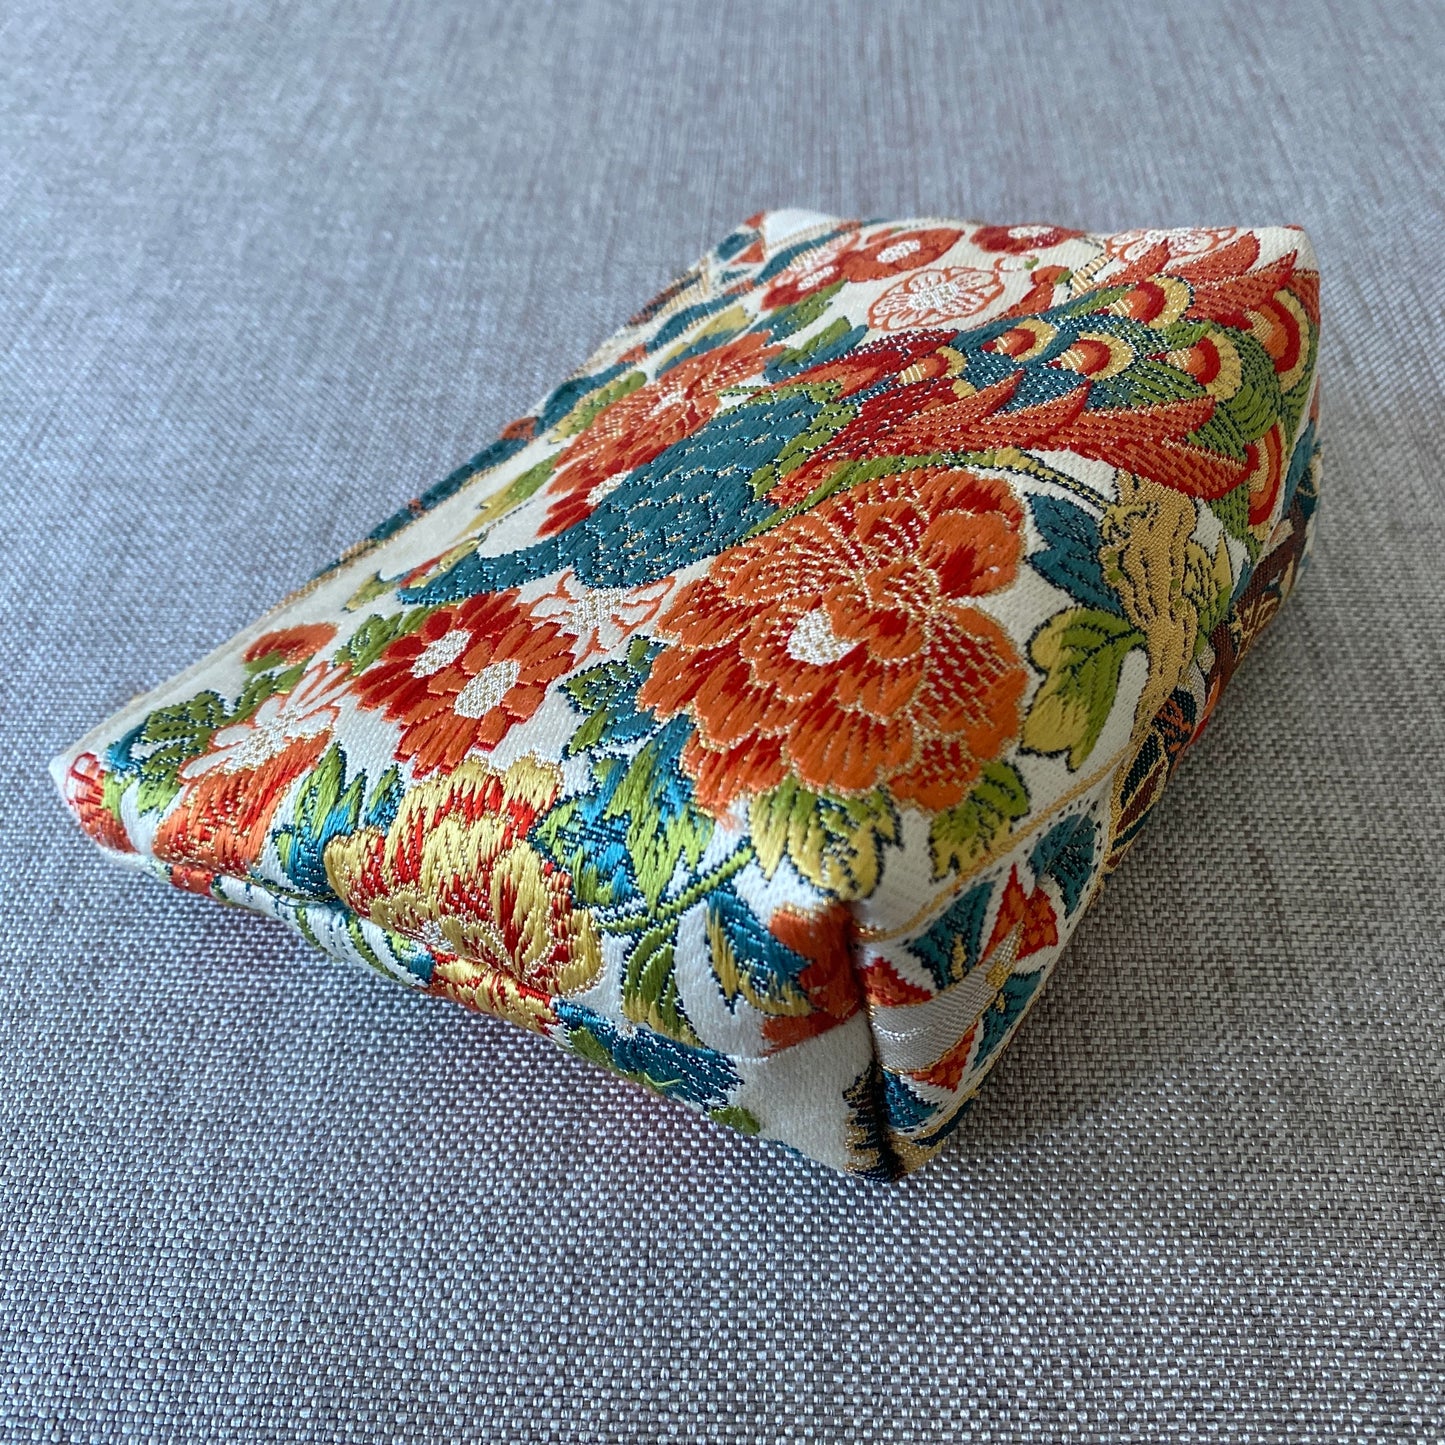 Small Silk Obi pouch, Handcrafted, Upcycled